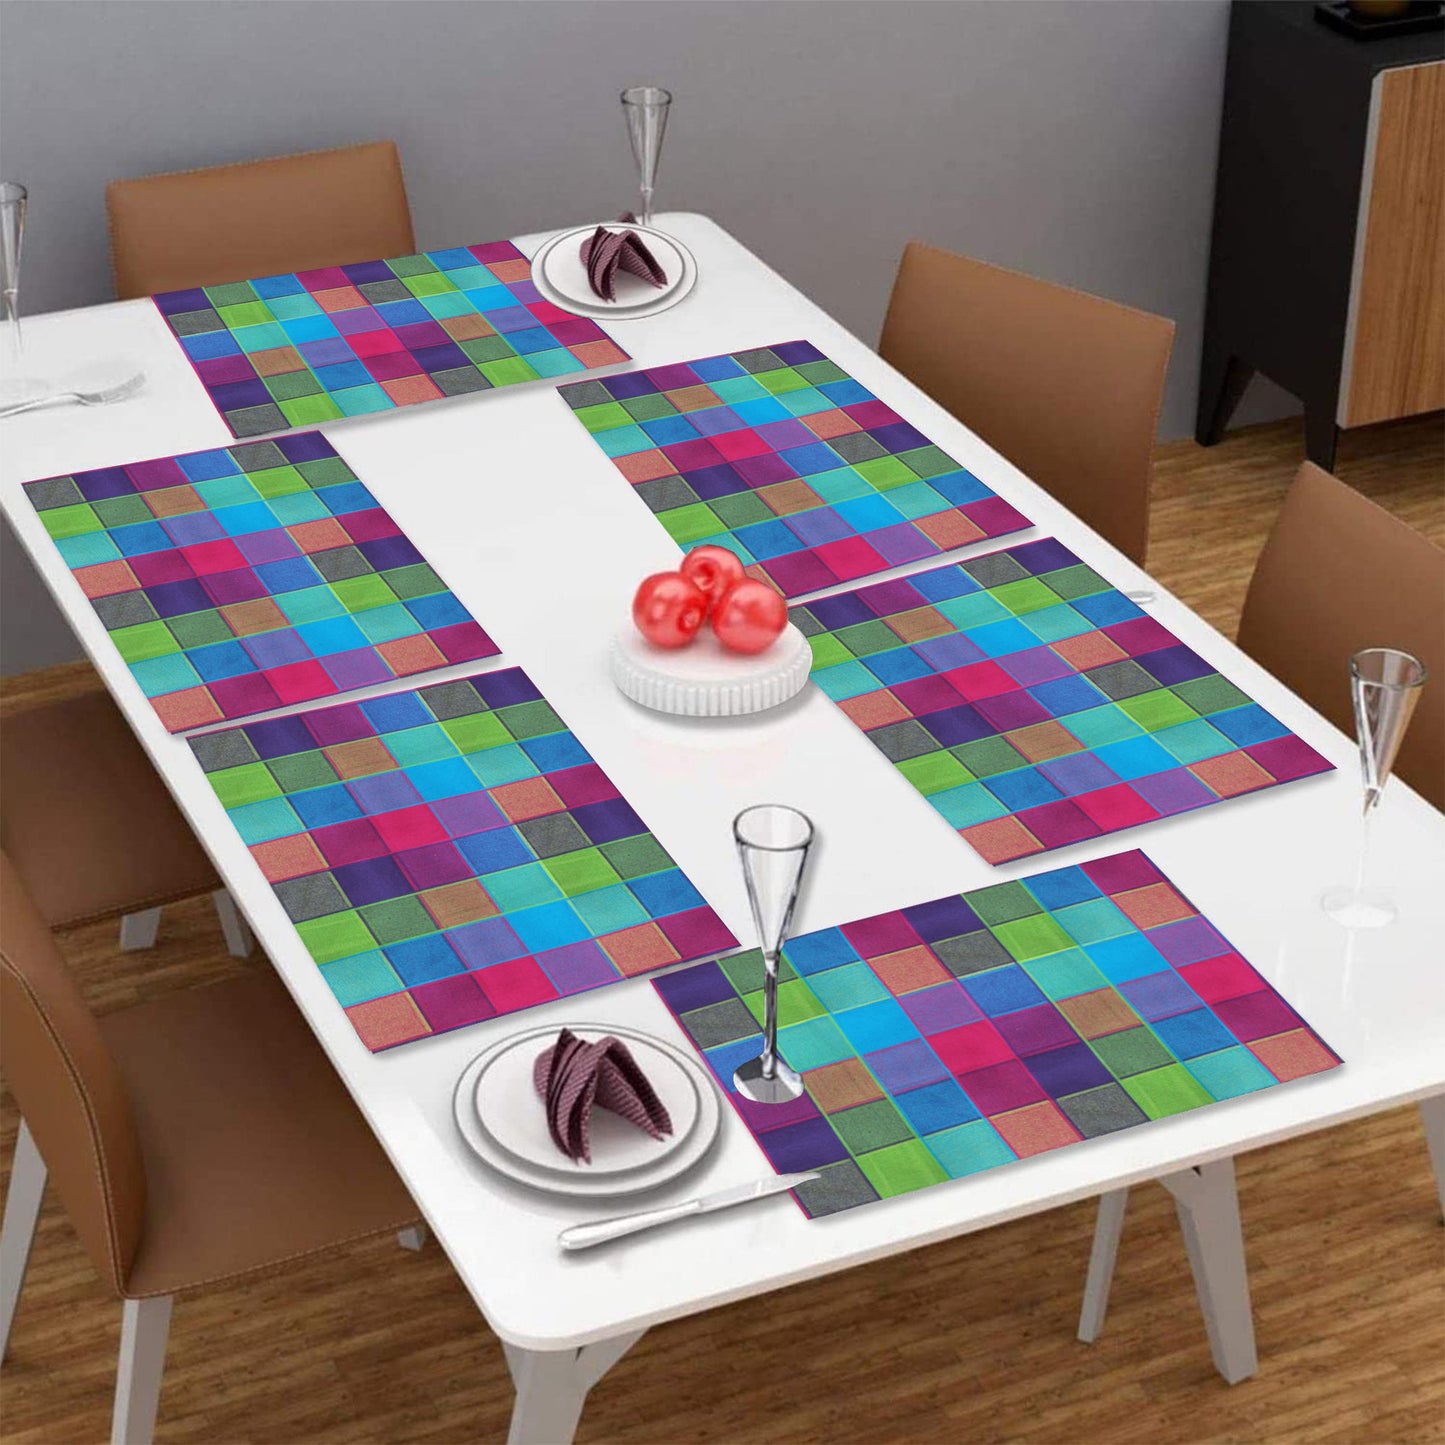 Lushomes Table Mat Multi Checks design Dining Table Mat table mats set of 6 Also Used as kitchen mat fridge mat cupboard sheets for wardrobe Fused Texture Pack of 6 13x18 Inches 33x48 Cms